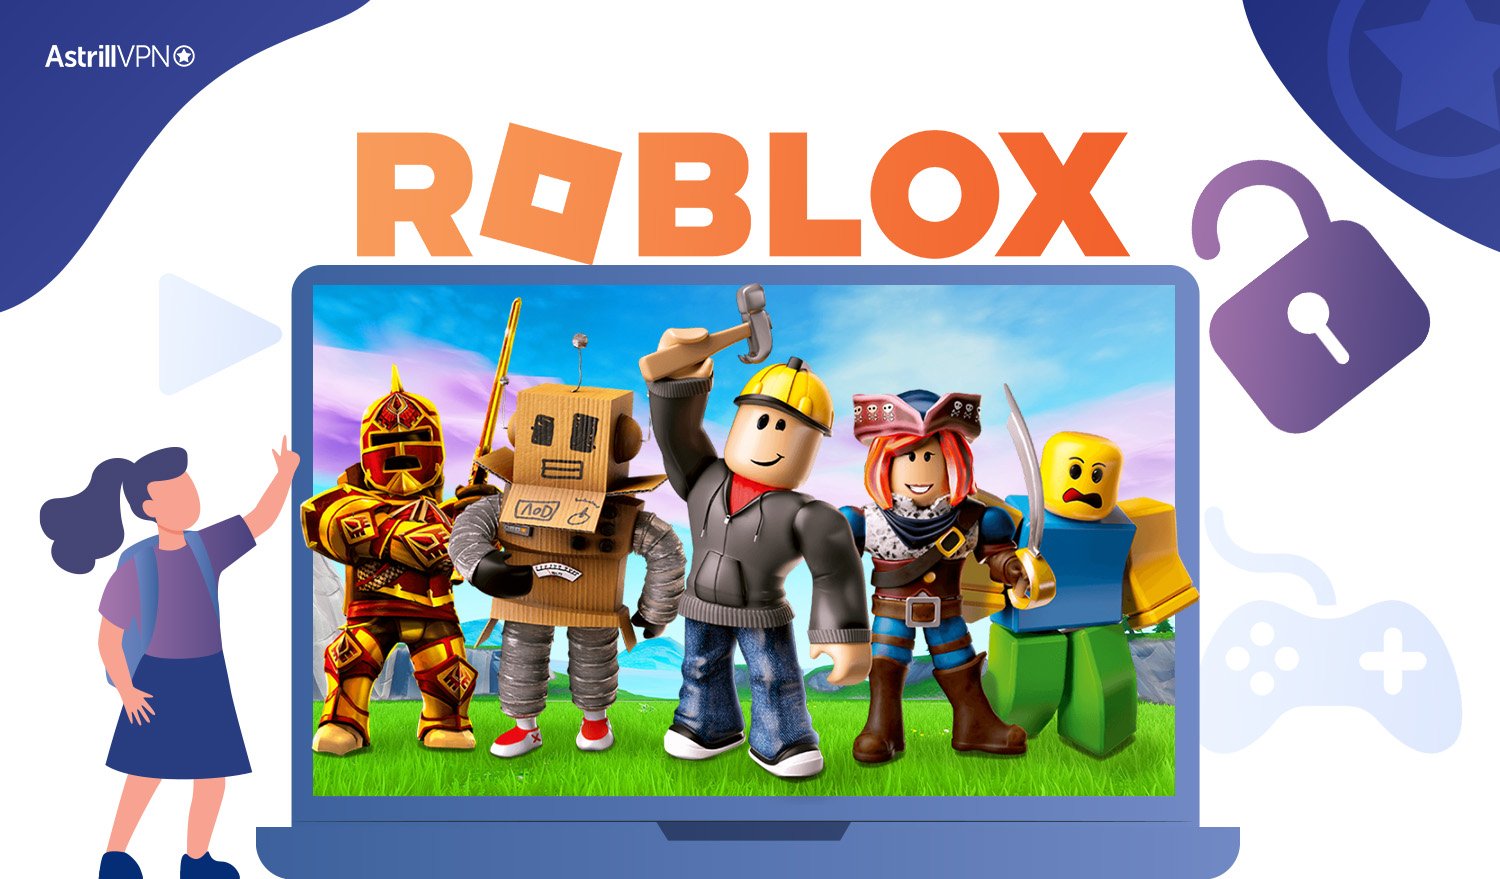 How to Unblock Roblox on School Chromebook 